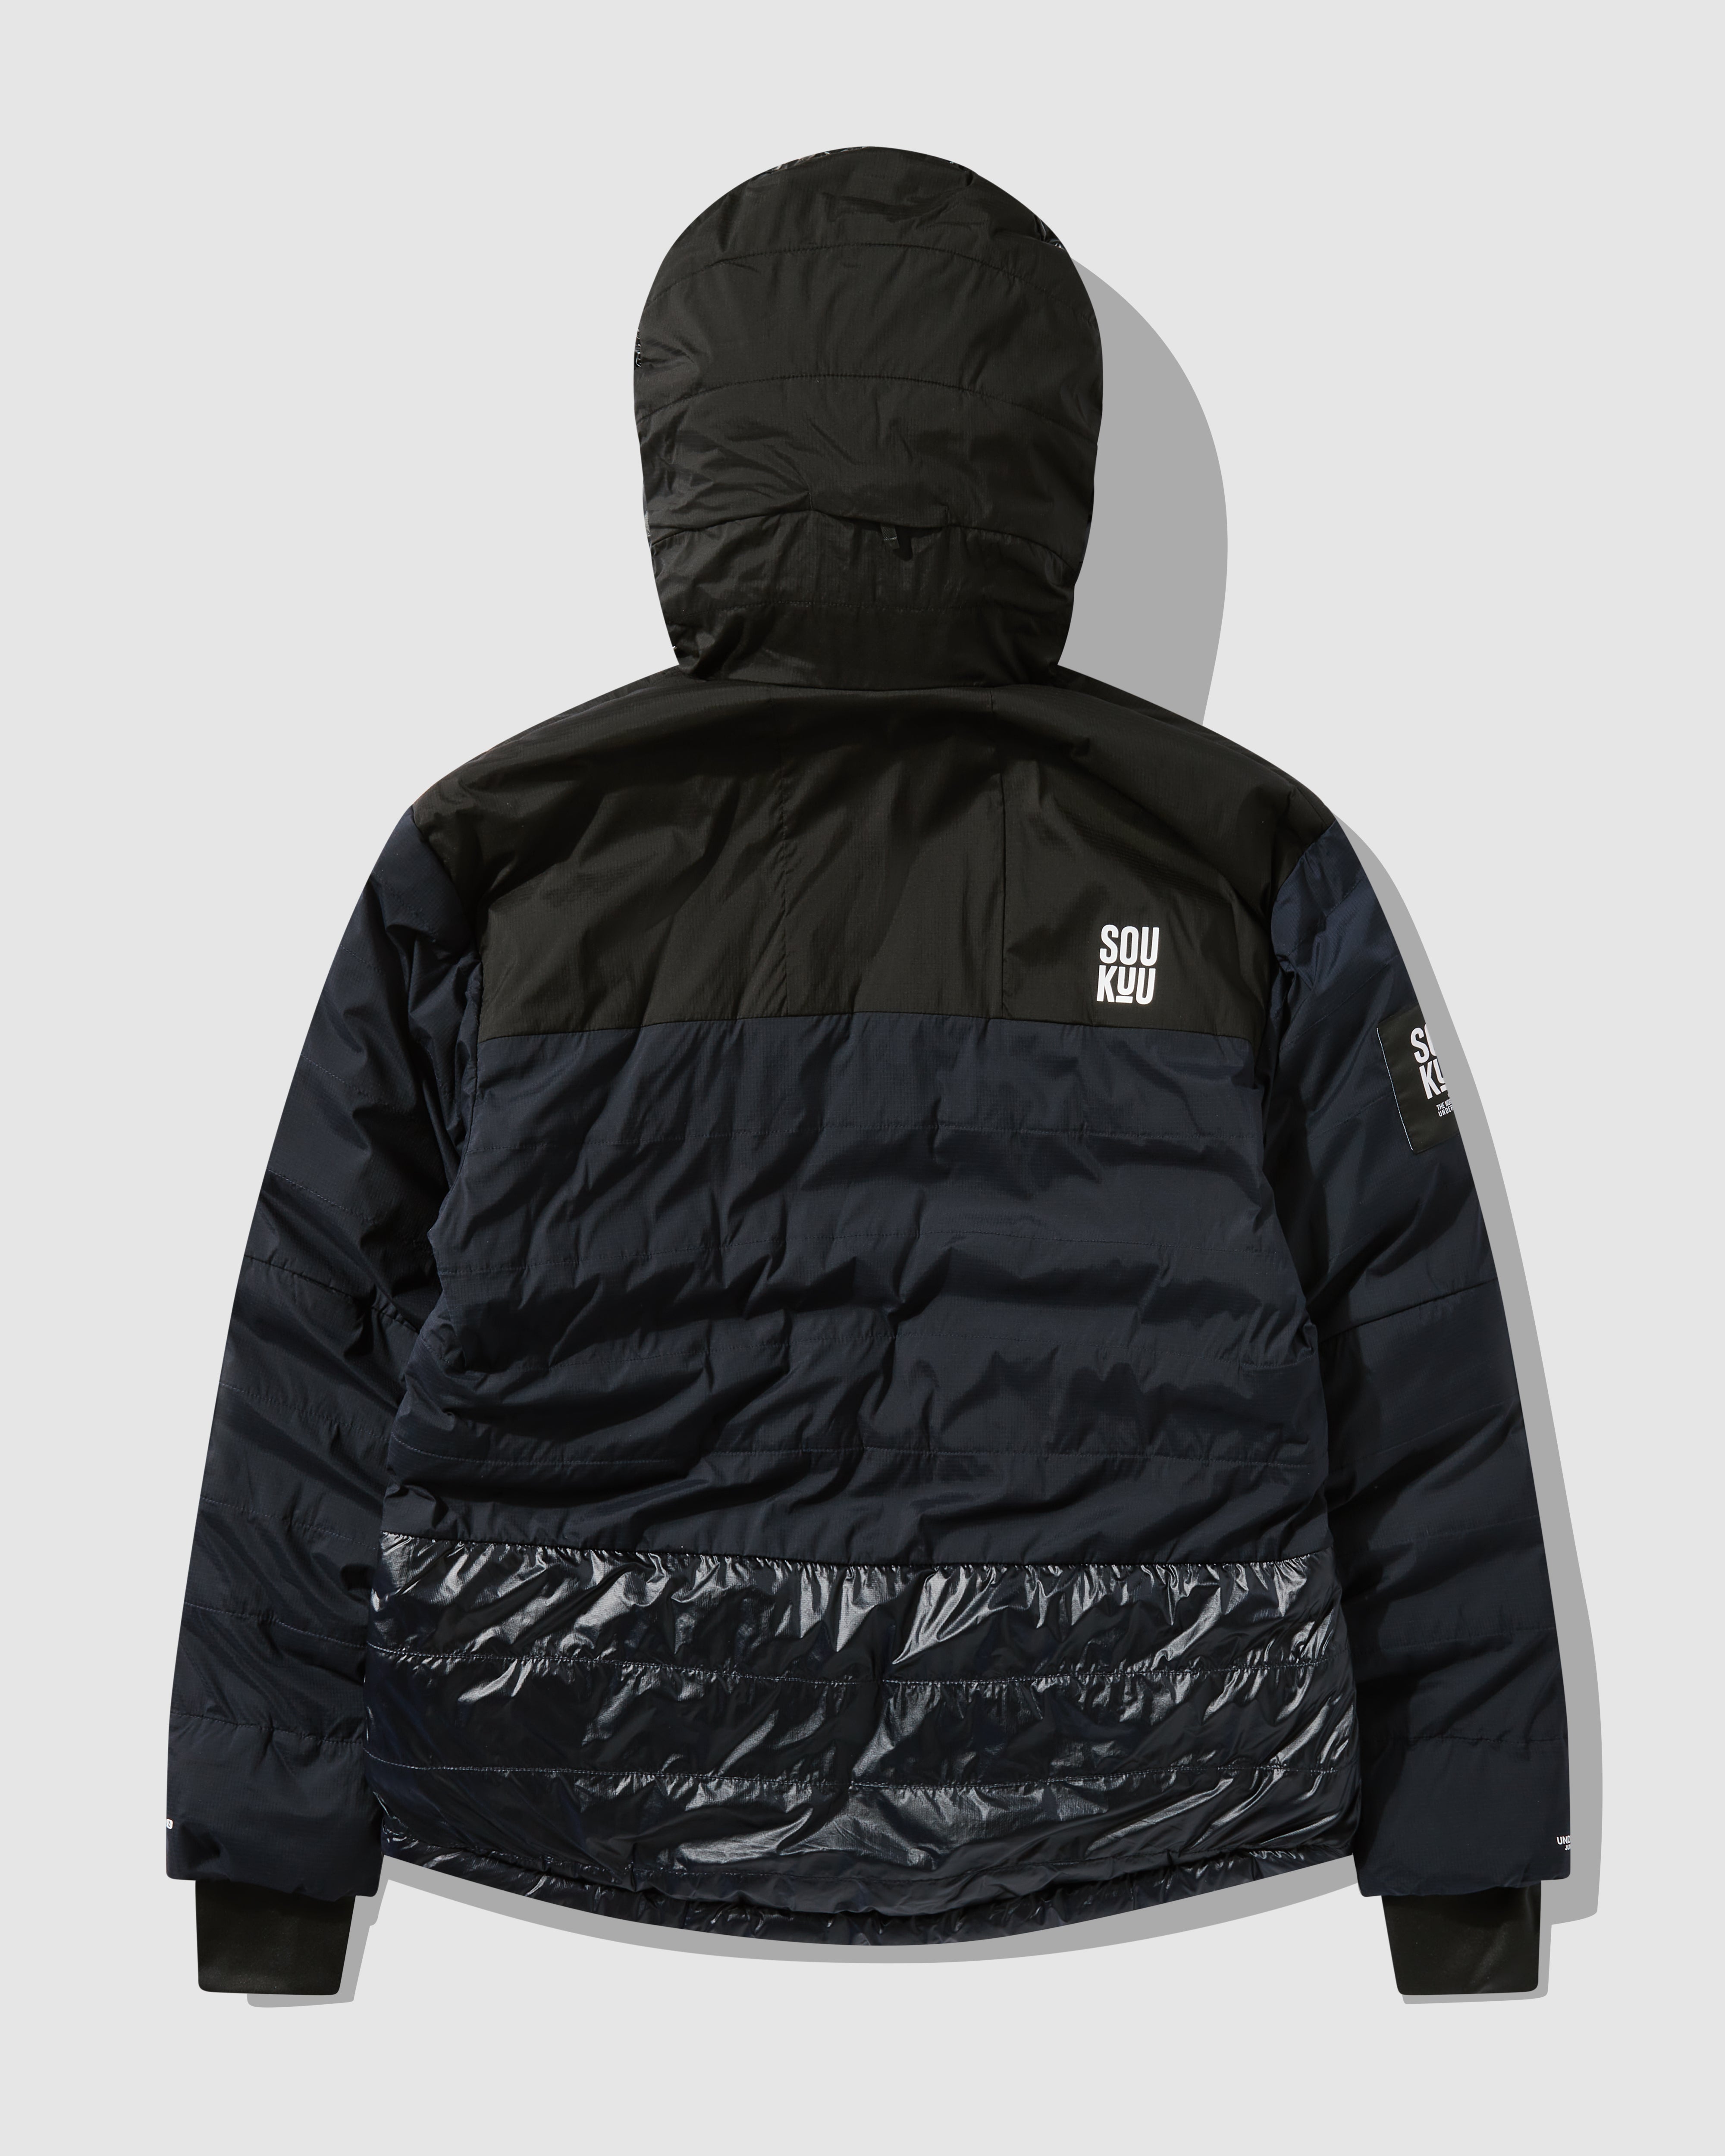 SOUKUU by The North Face X Undercover – DSM London